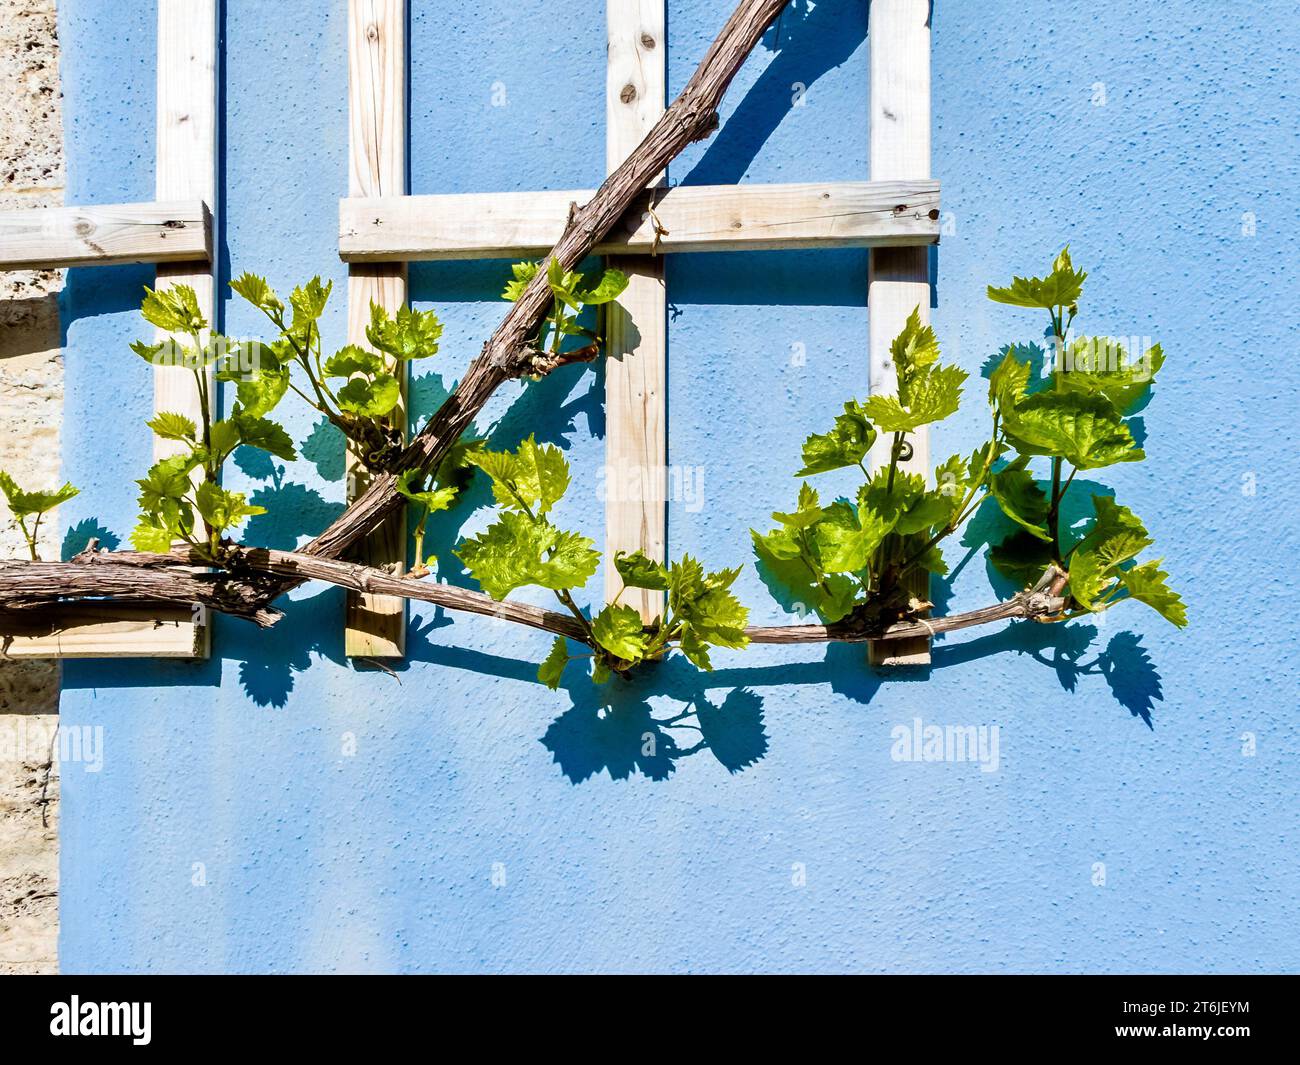 Climbing vine plant with fresh green leaves and its shadow against a light blue stone wall in spring. Stock Photo